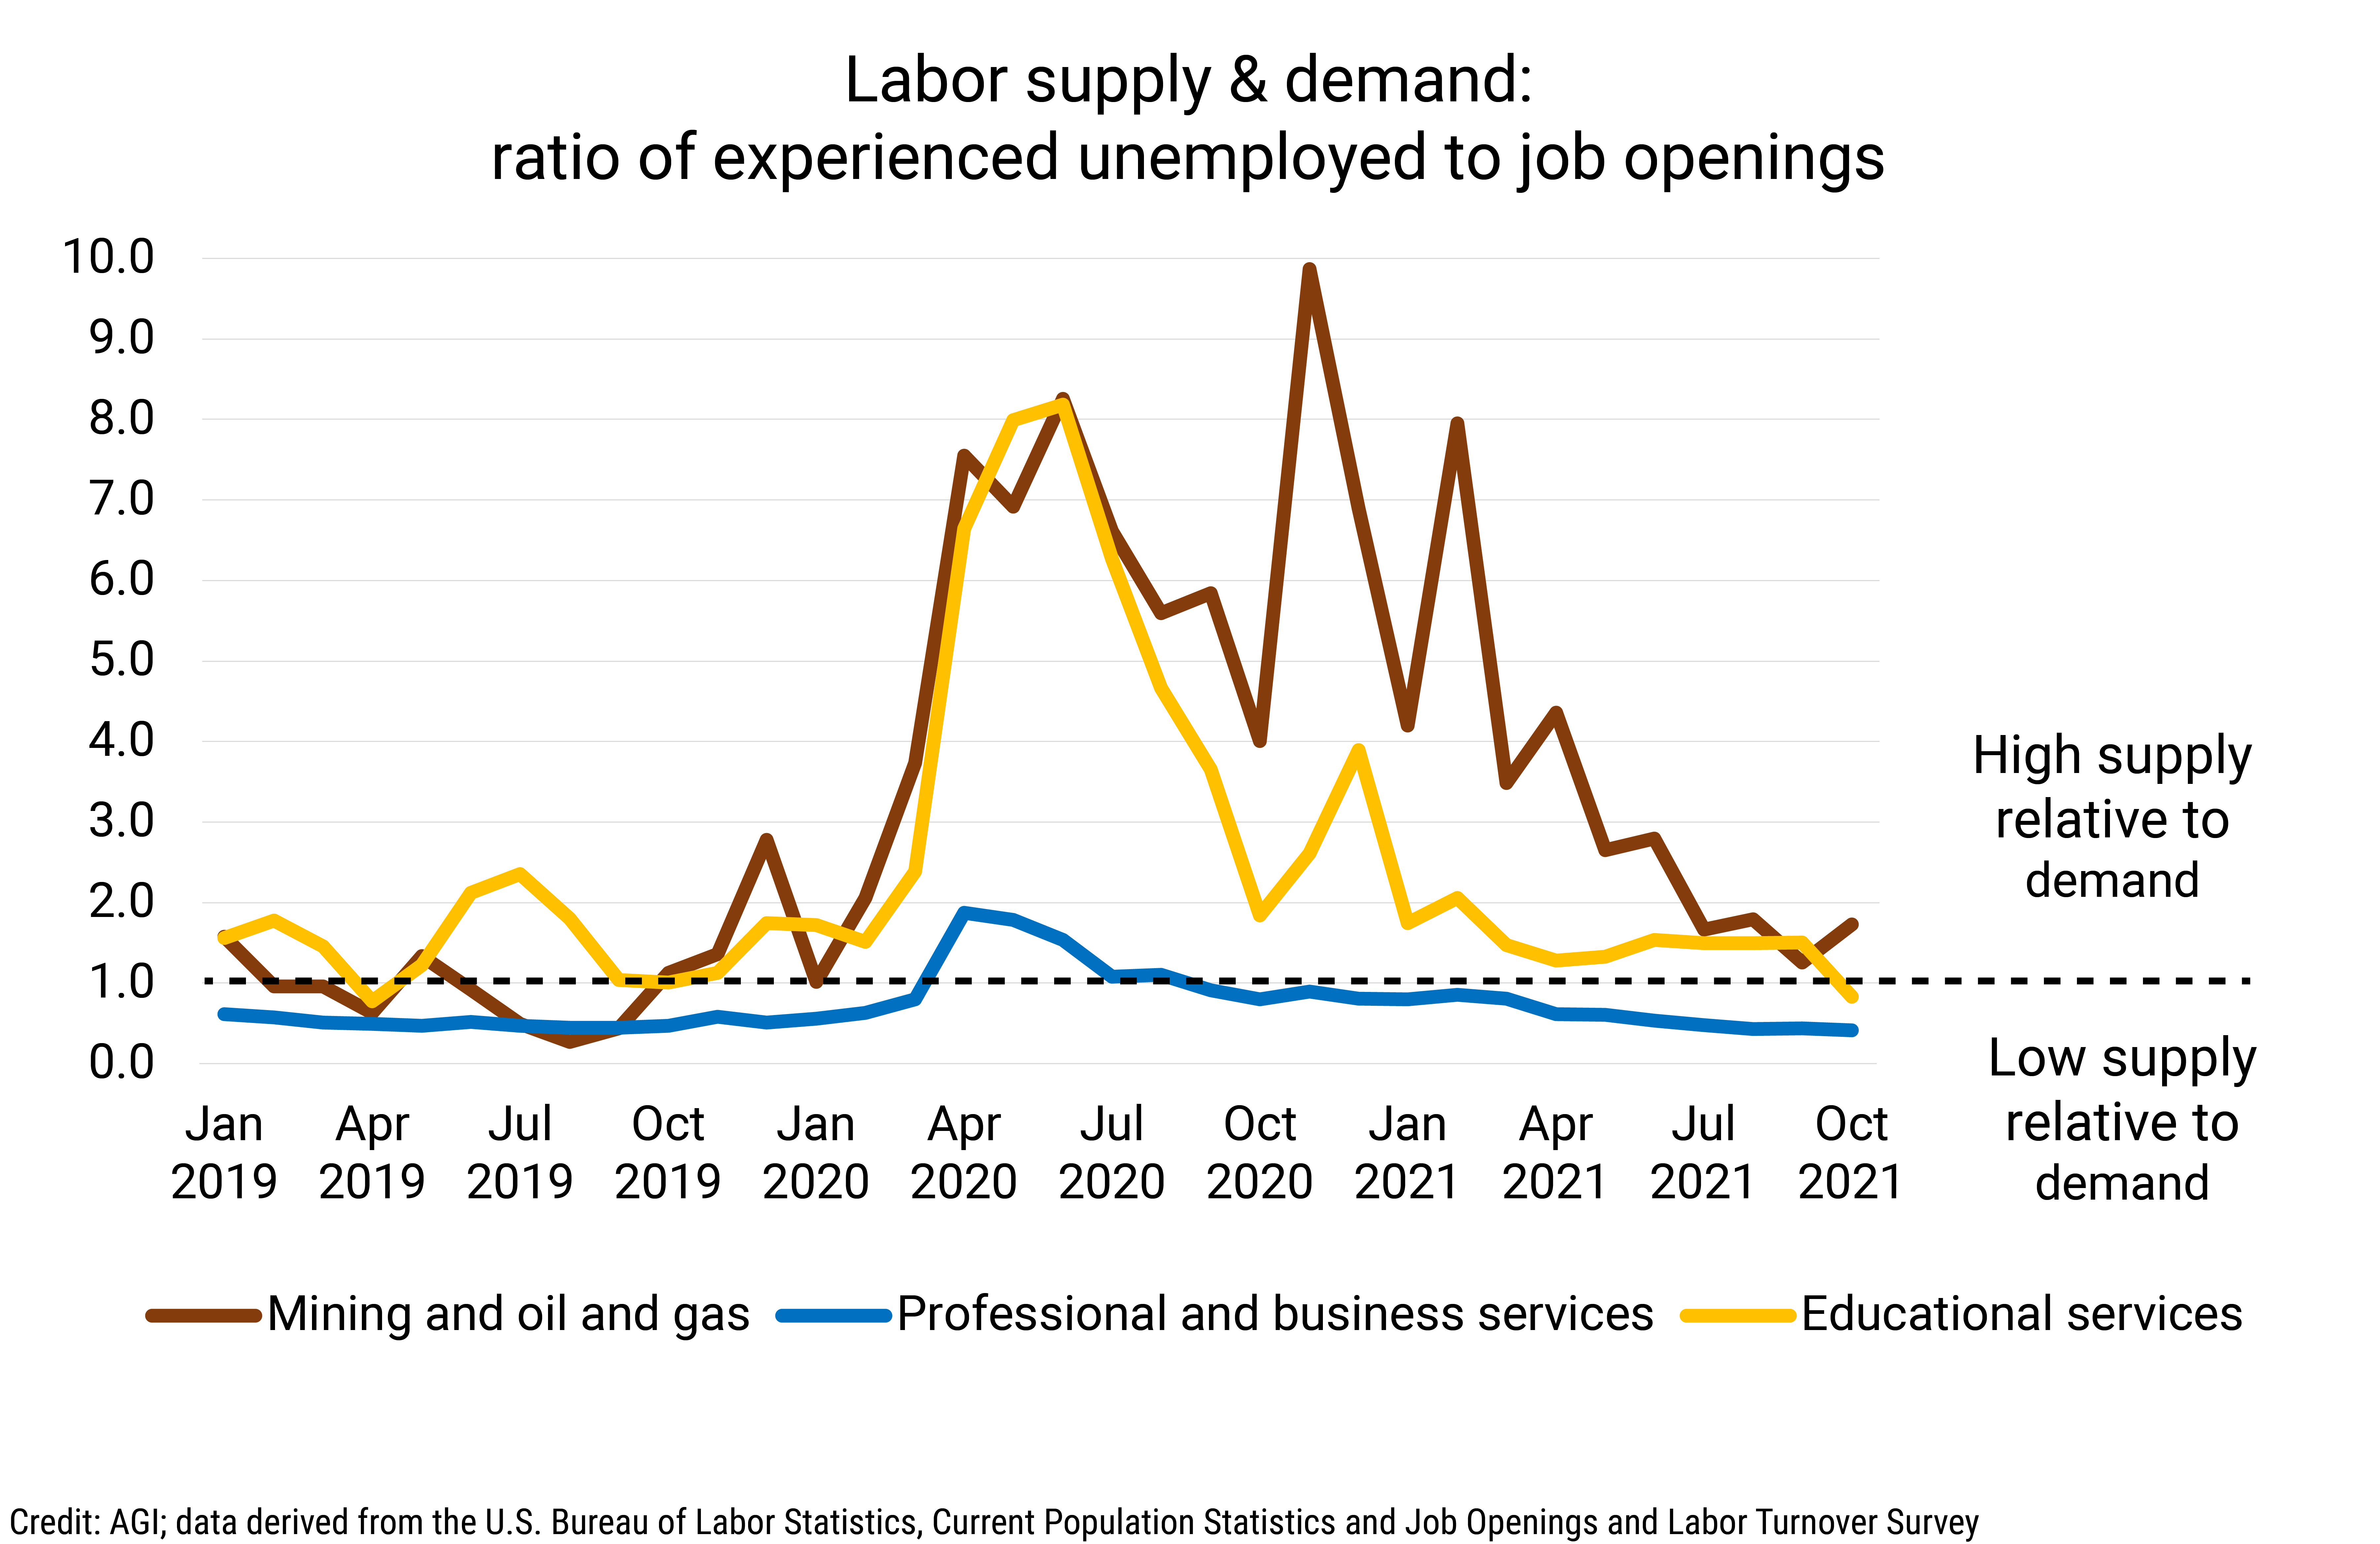 DB_2022-001 chart 06: Labor supply & demand: ratio of experienced unemployed to job openings (Credit: AGI; data derived from the U.S. Bureau of Labor Statistics, Current Population Statistics and Job Openings and Labor Turnover Survey)